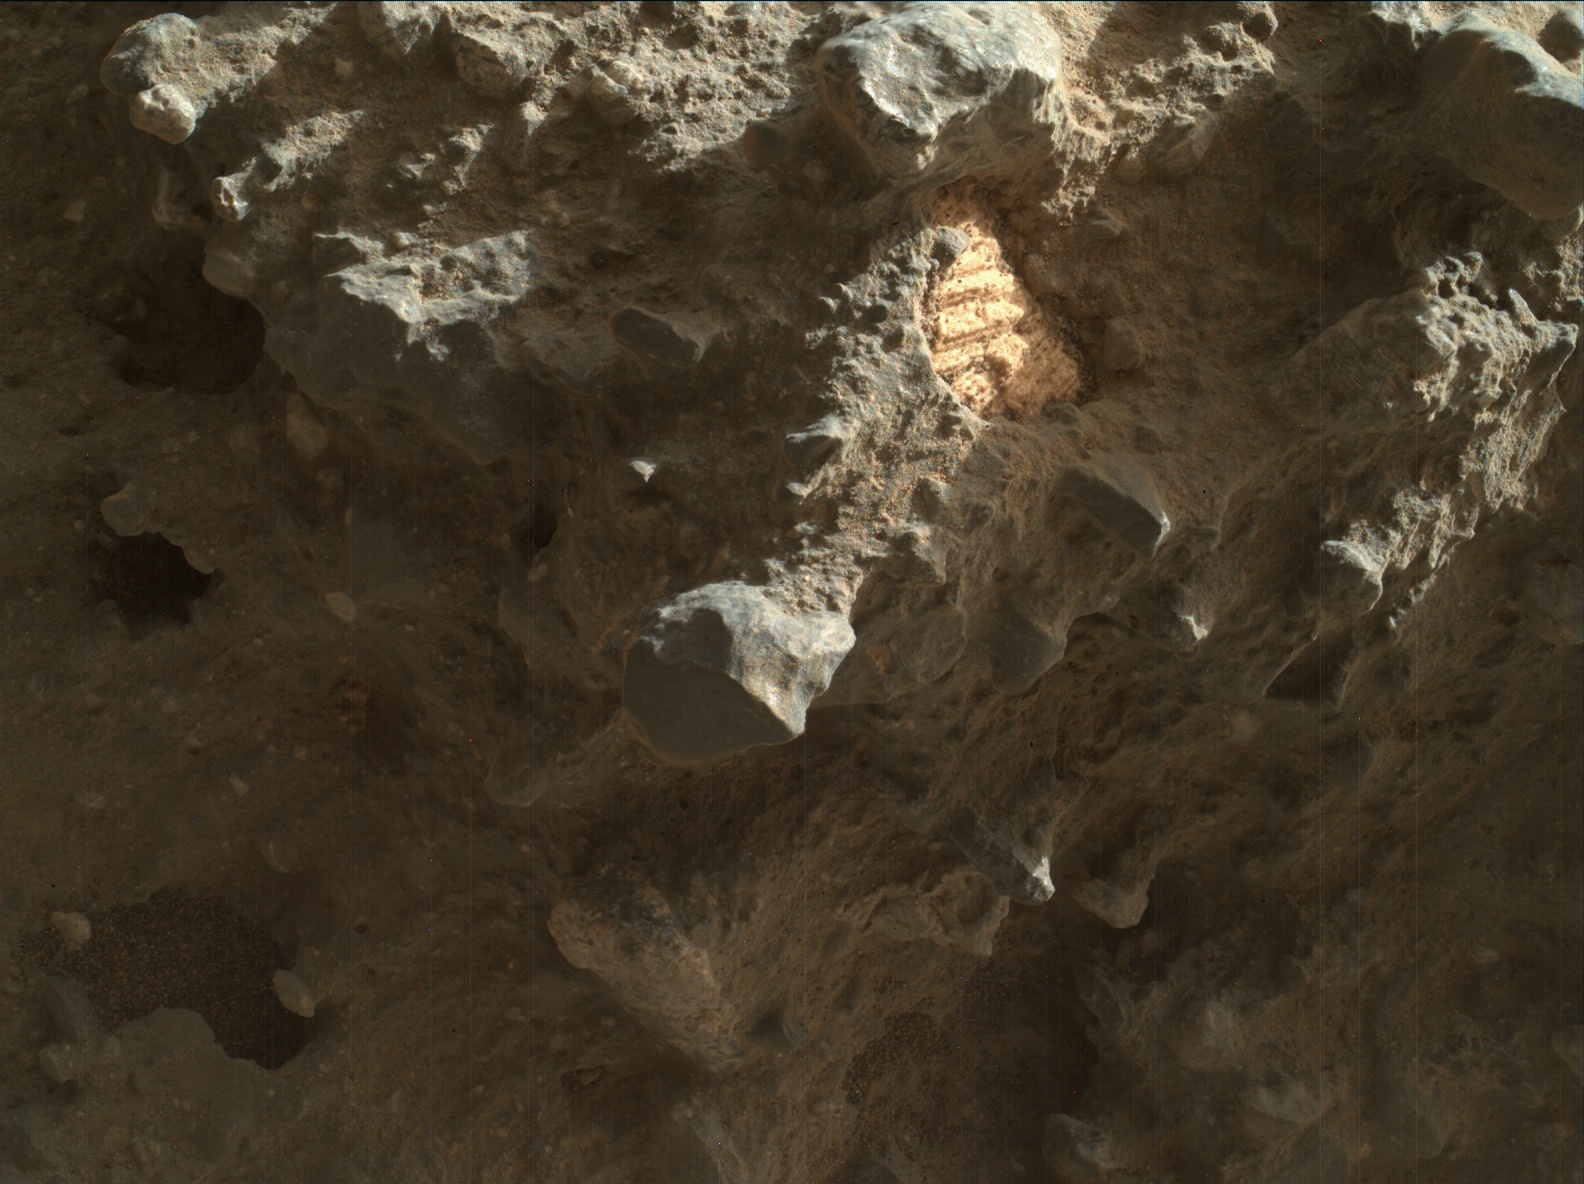 Nasa's Mars rover Curiosity acquired this image using its Mars Hand Lens Imager (MAHLI) on Sol 1411